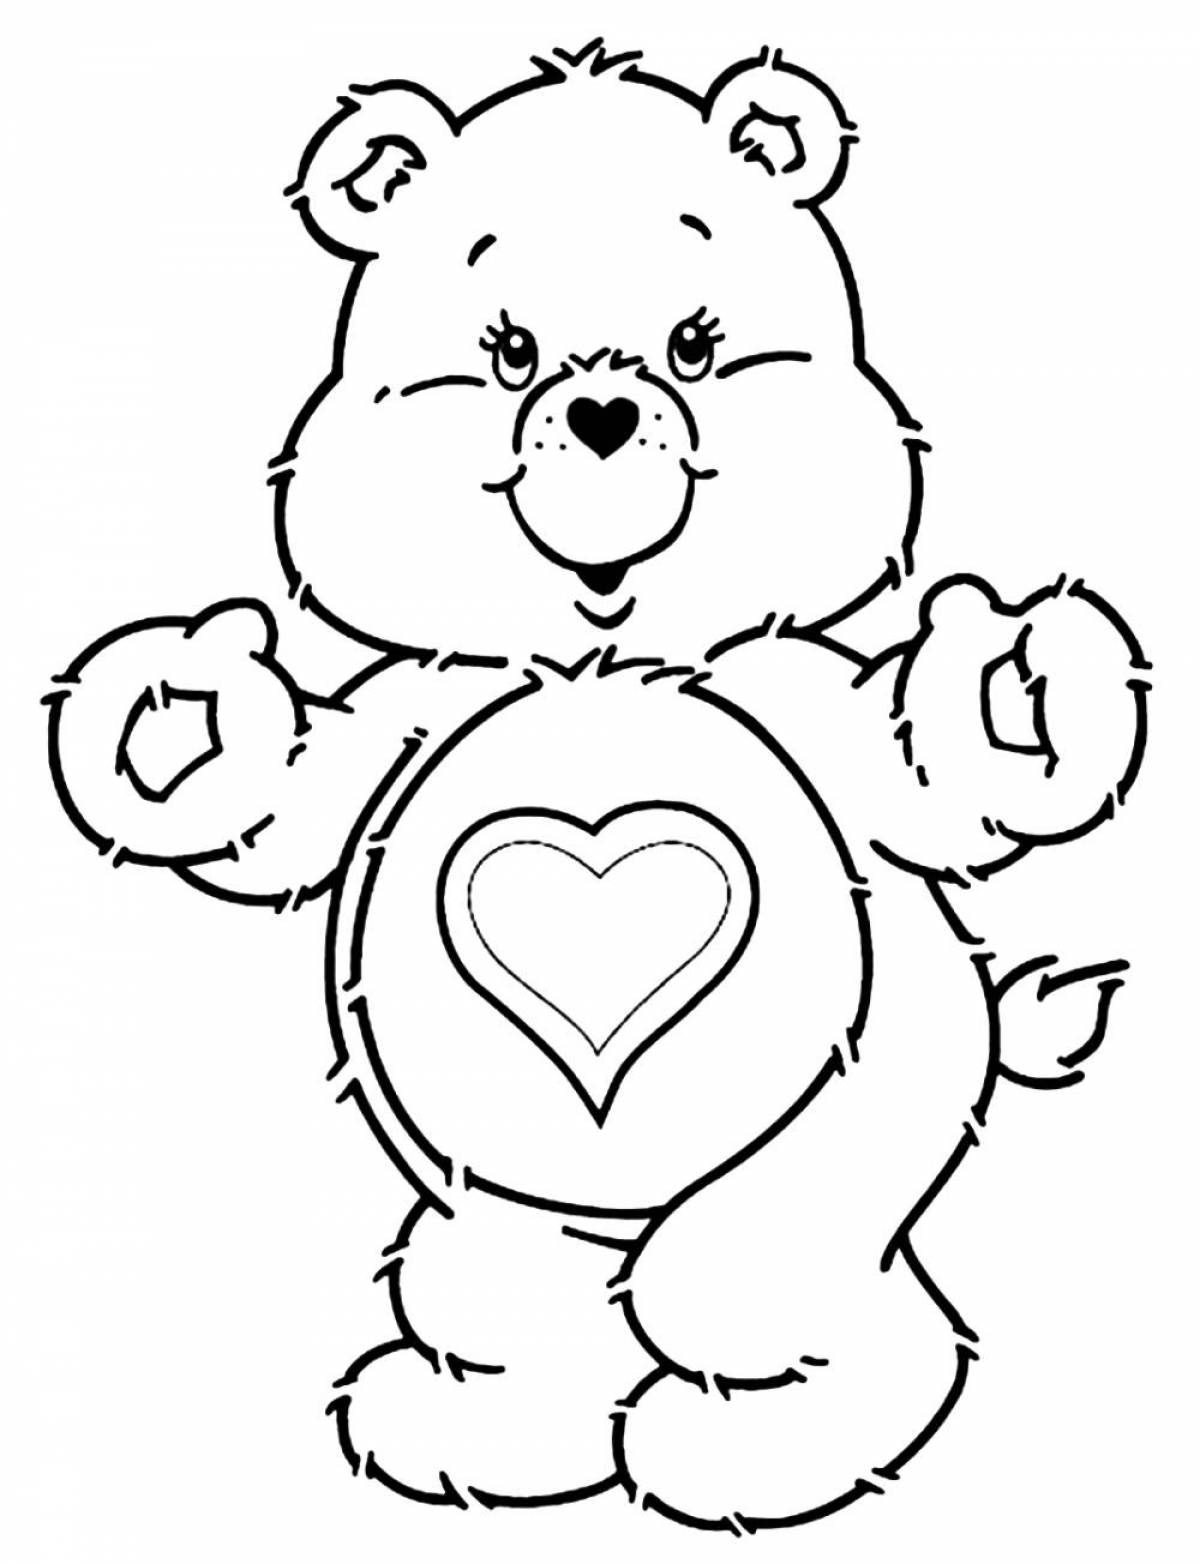 Colorful teddy bear with a heart coloring book